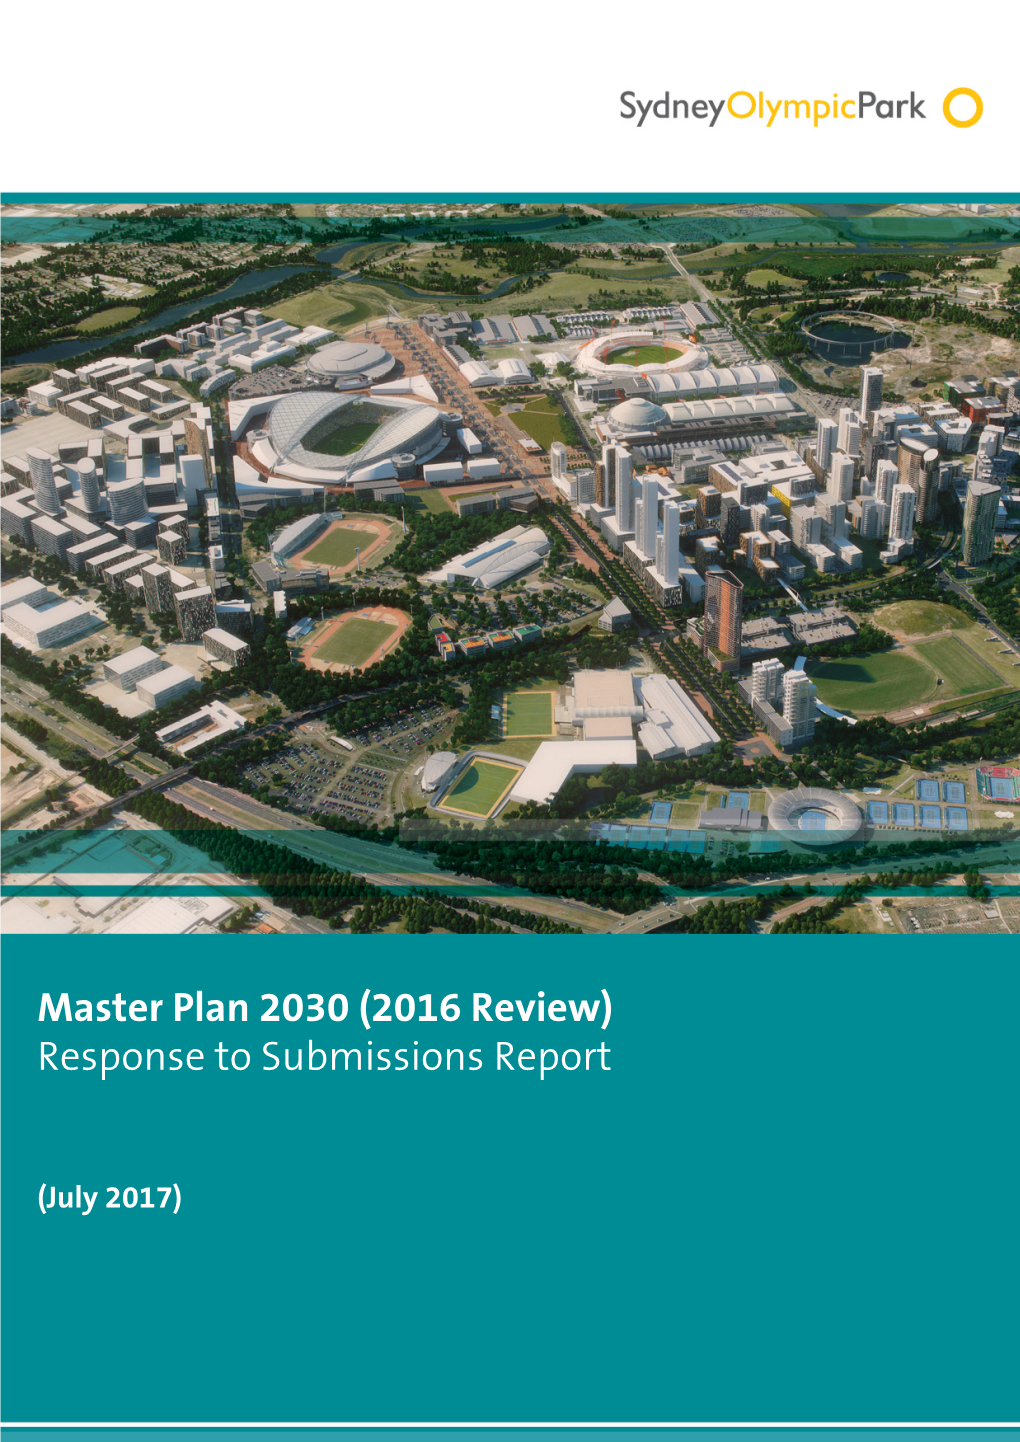 Master Plan 2030 (2016 Review) Response to Submissions Report